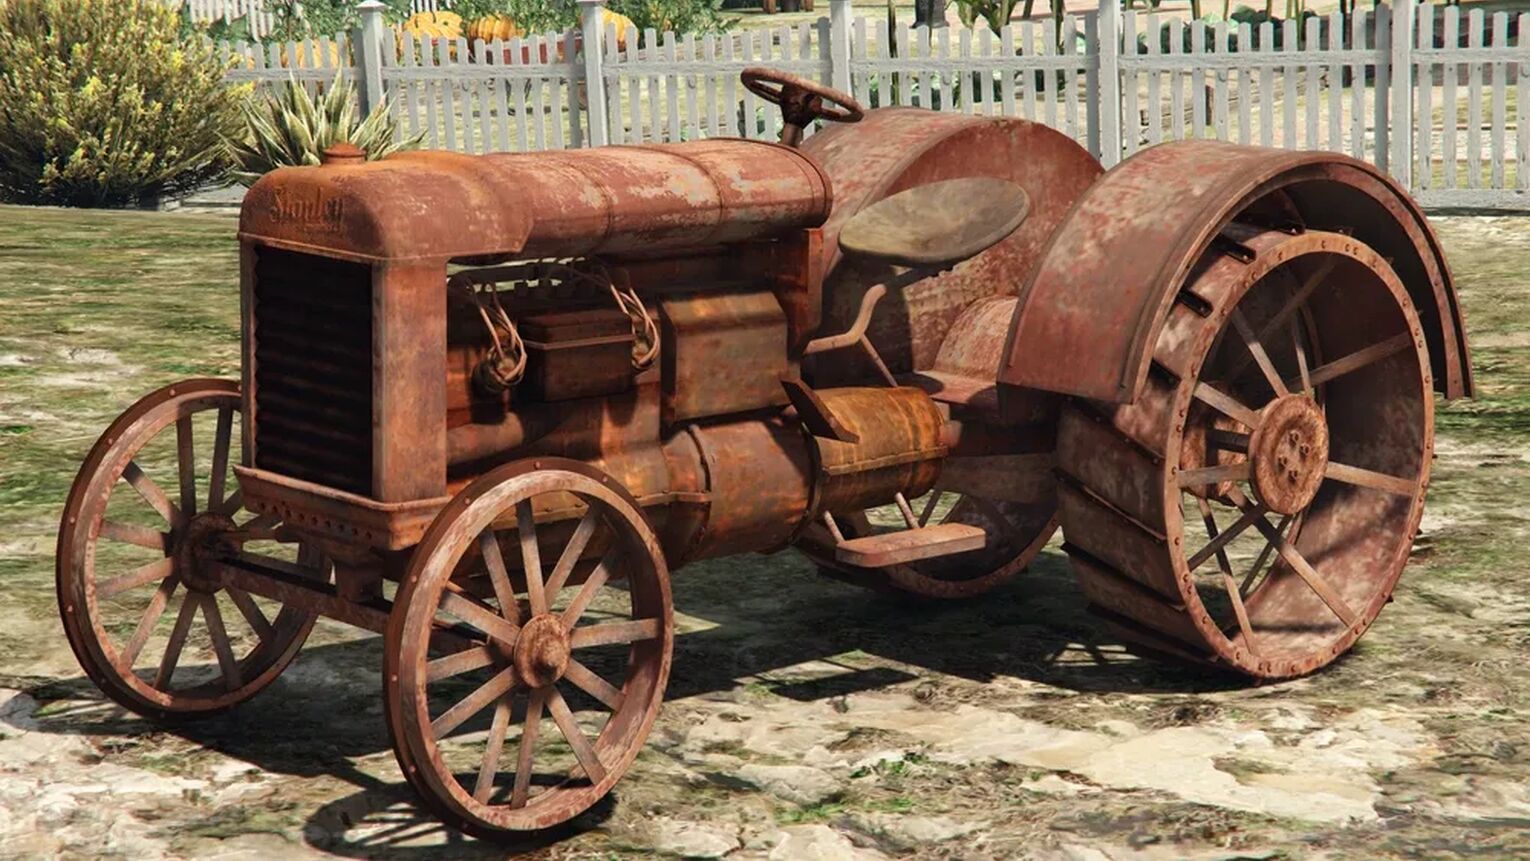 Rusted Tractor in GTA